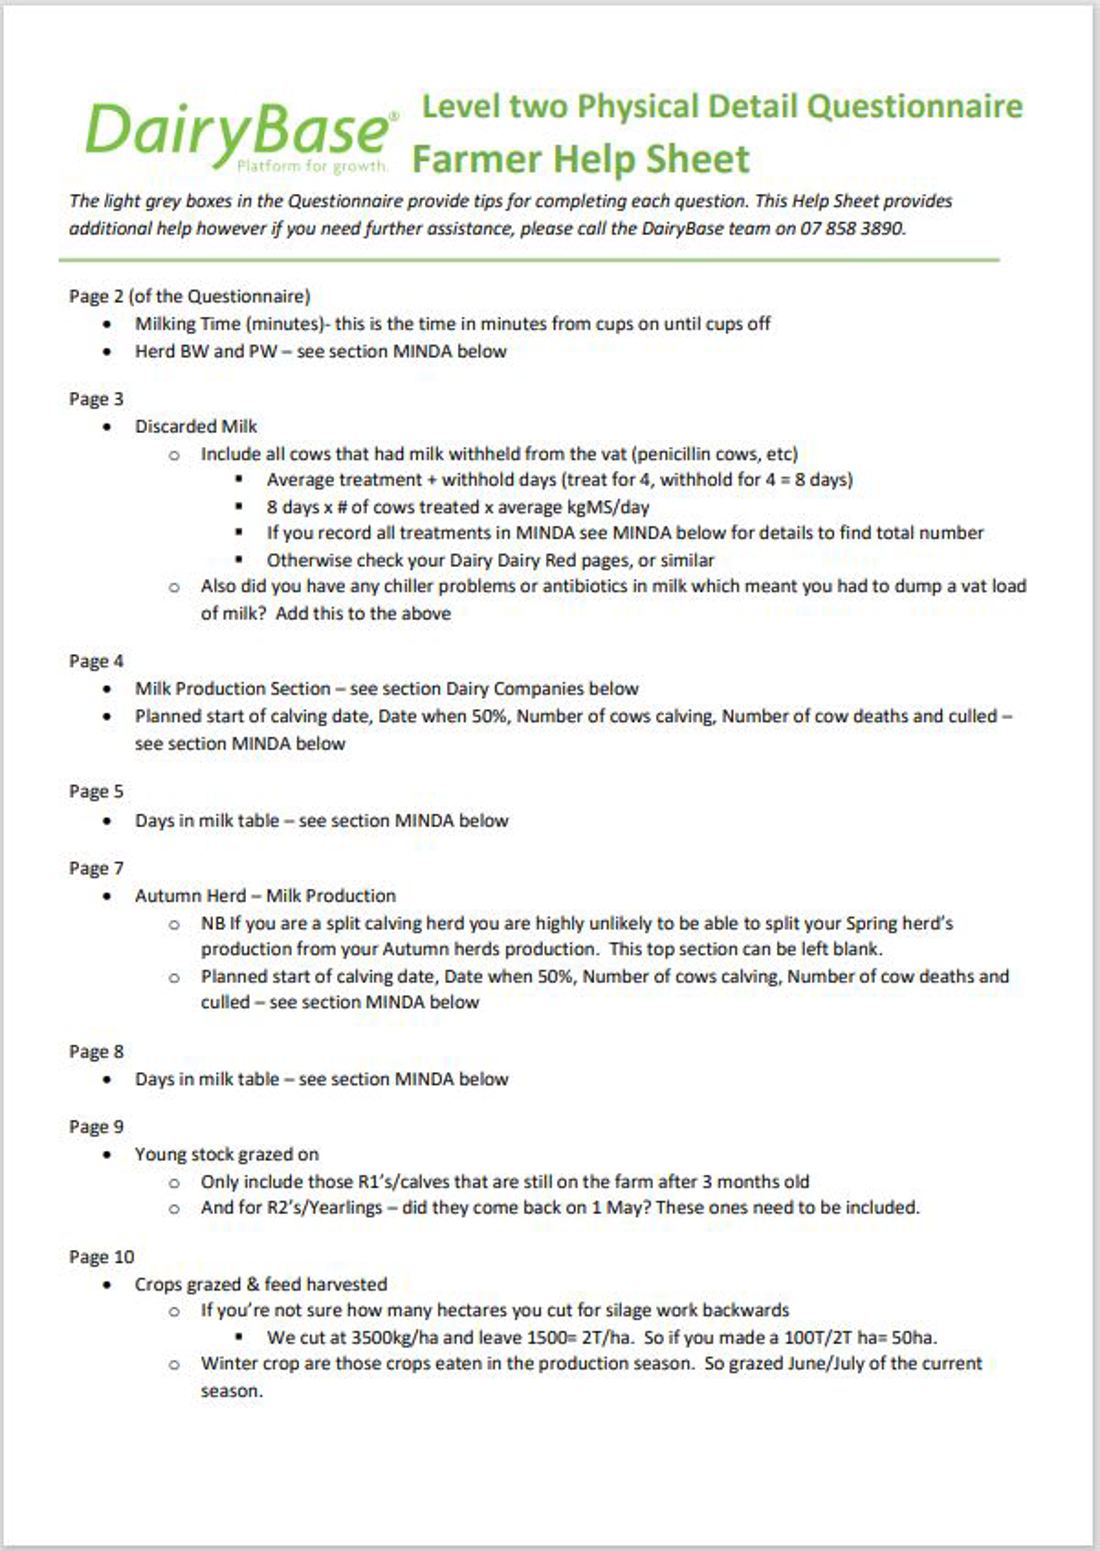 Dairybase Level 2 Physical Questionnaire Help Sheet Image